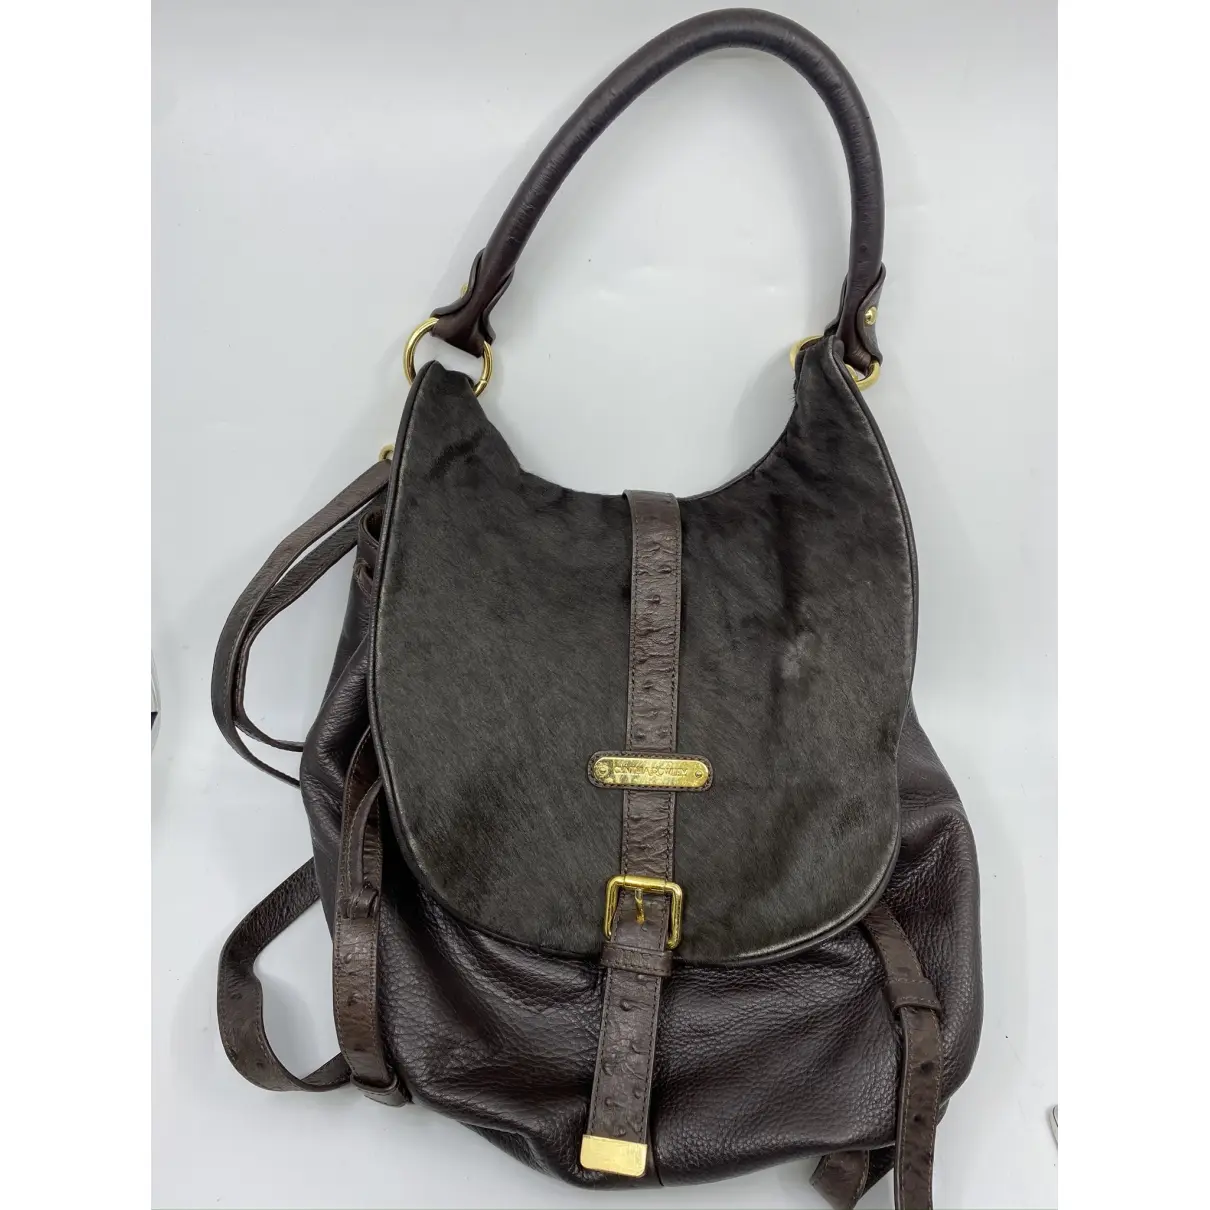 Leather backpack Cynthia Rowley